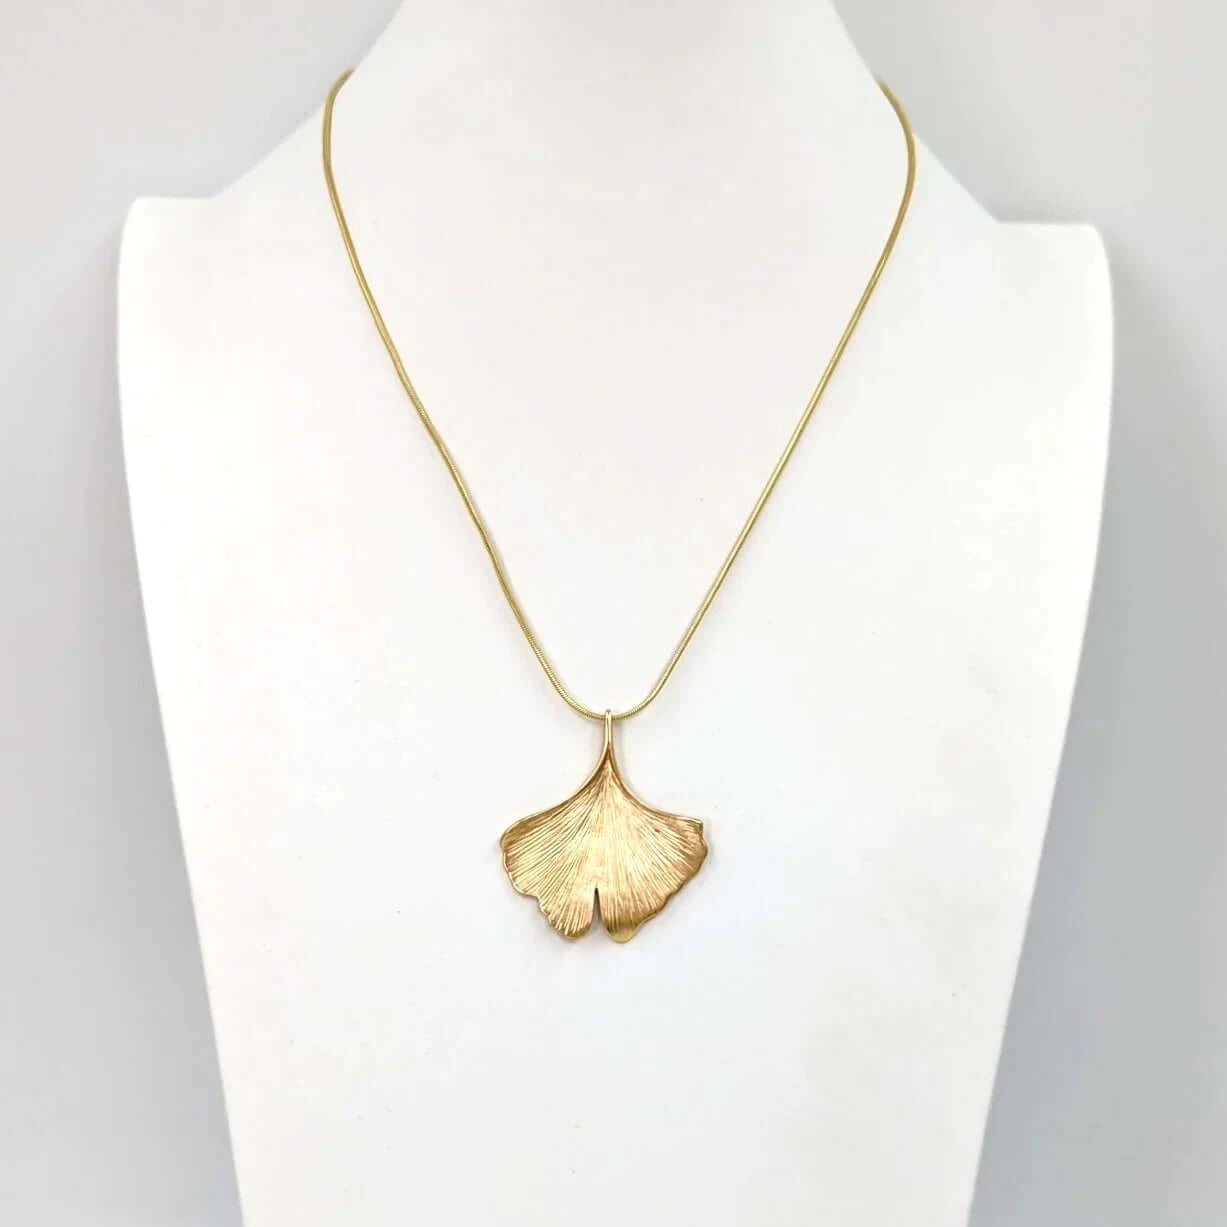 Ginko leaf pendant necklace on snake chain - gold